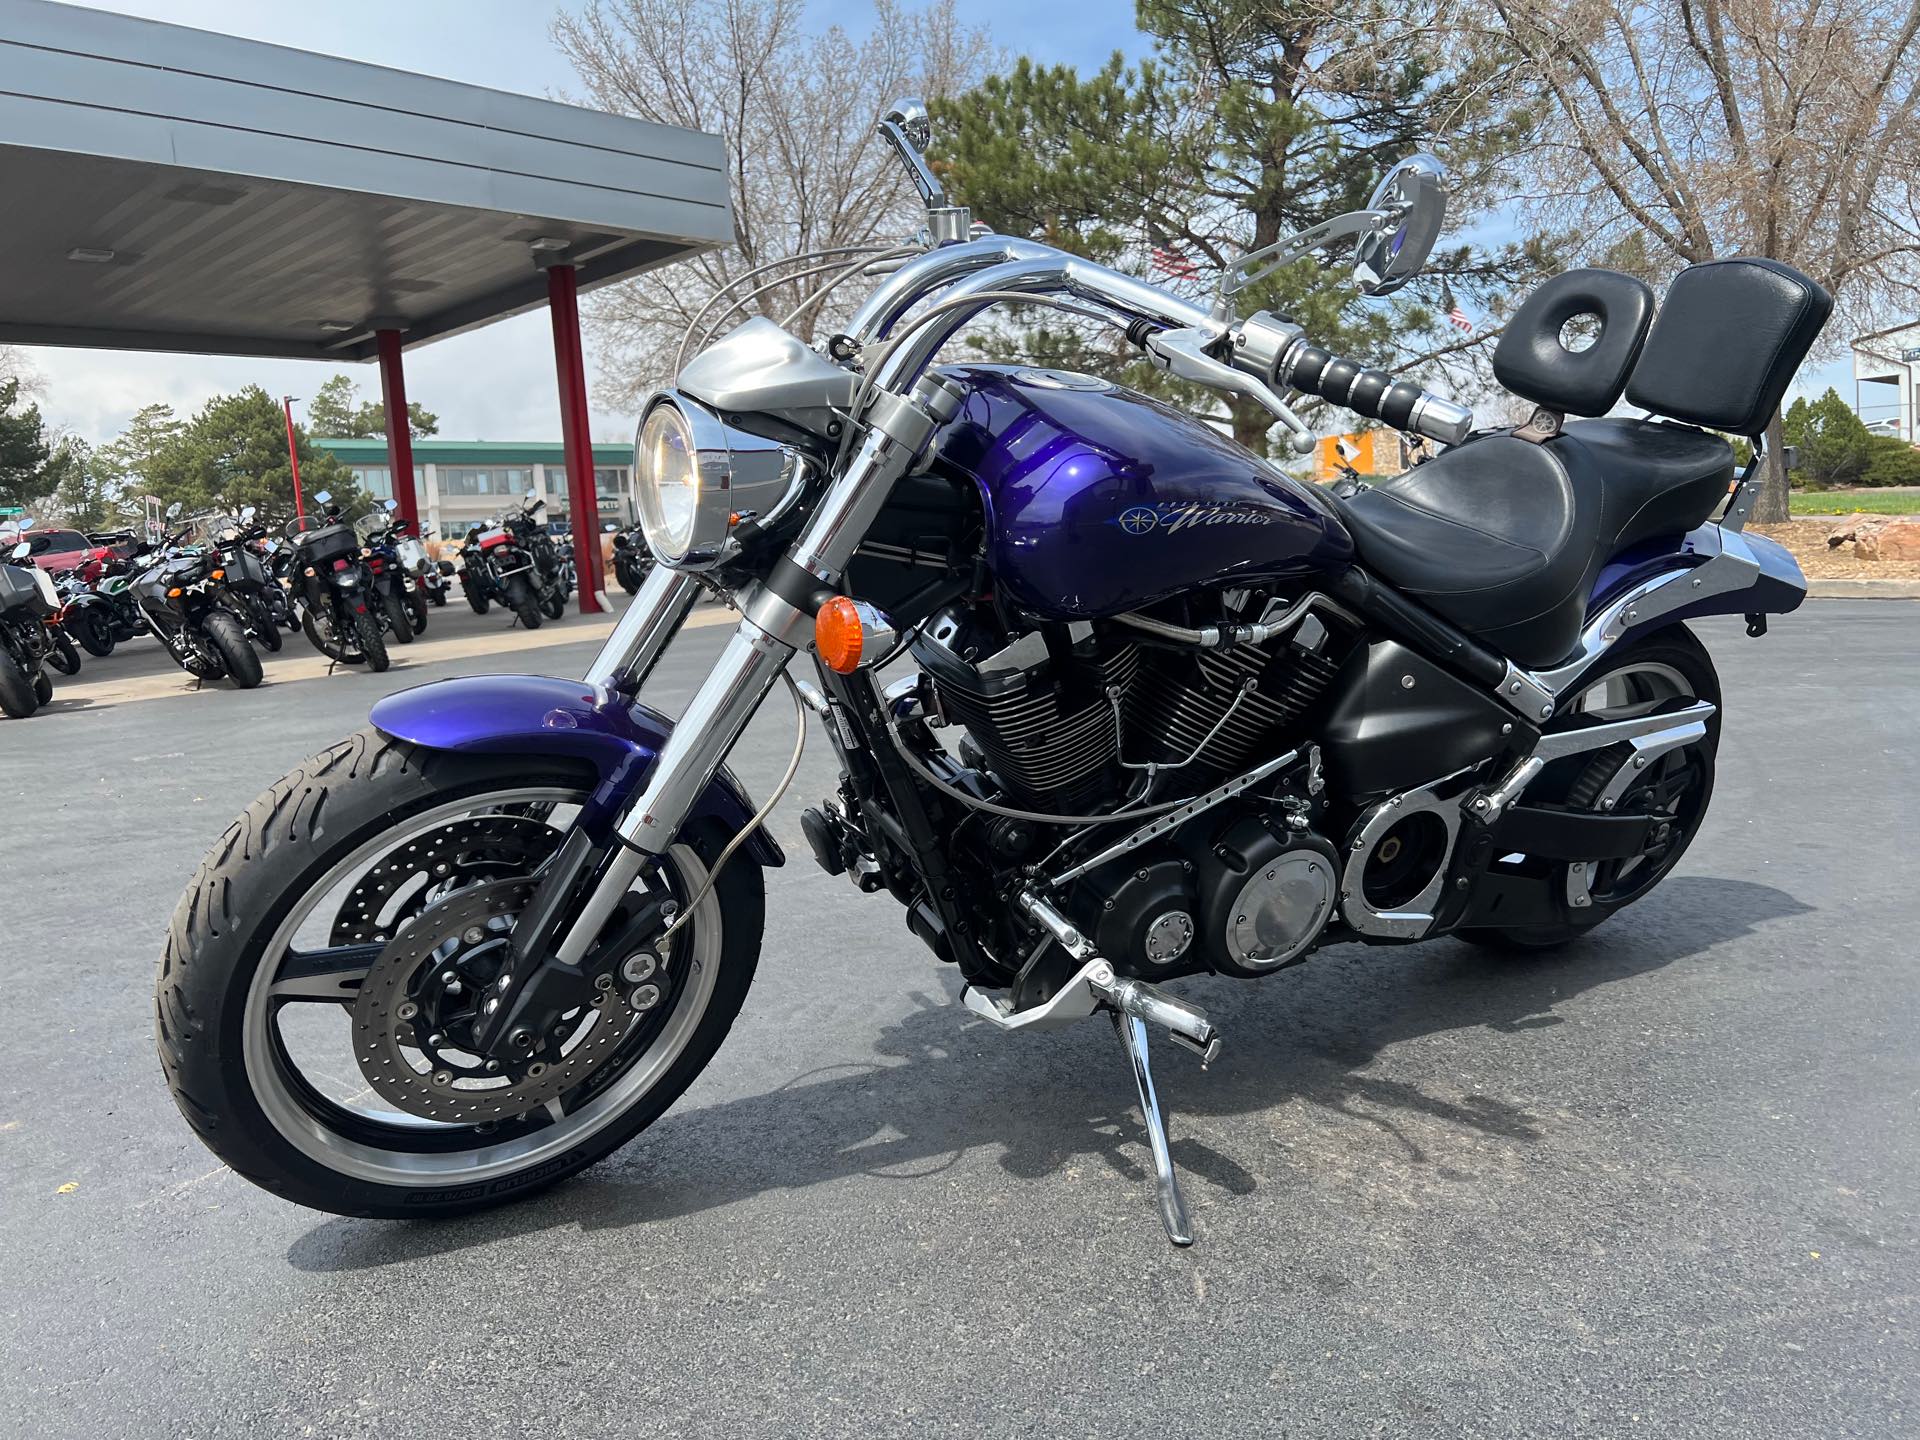 2002 YAMAHA XV1700 at Aces Motorcycles - Fort Collins